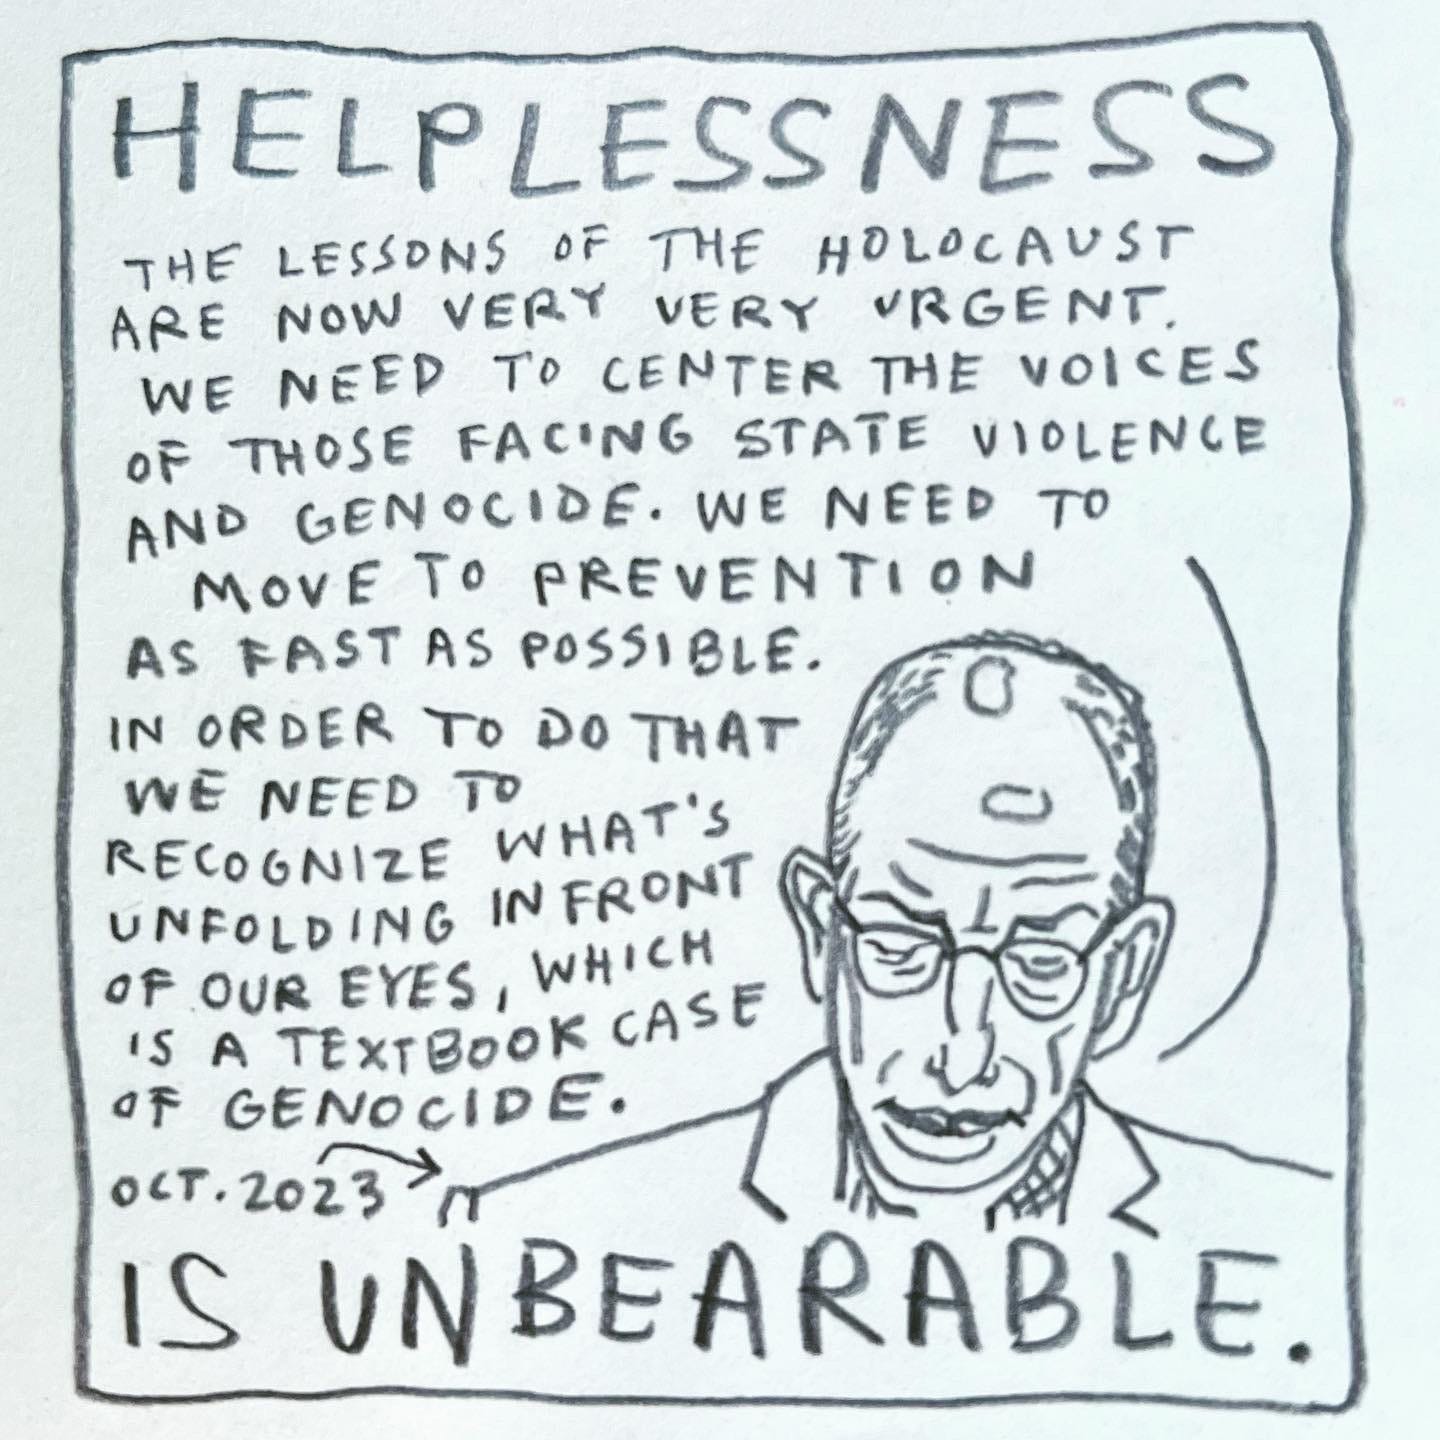 Panel 5: helplessness is unbearable. Image: the same man continues speaking, eyes downcast. An arrow pointing to him is labeled "Oct. 2023.” He is saying, ”The lessons of the Holocaust are now very very urgent. We need to center the voices of those facing state violence and genocide. We need to move to prevention as fast as possible. In order to do that we need to recognize what's unfolding in front of our eyes, which is a textbook case of genocide."